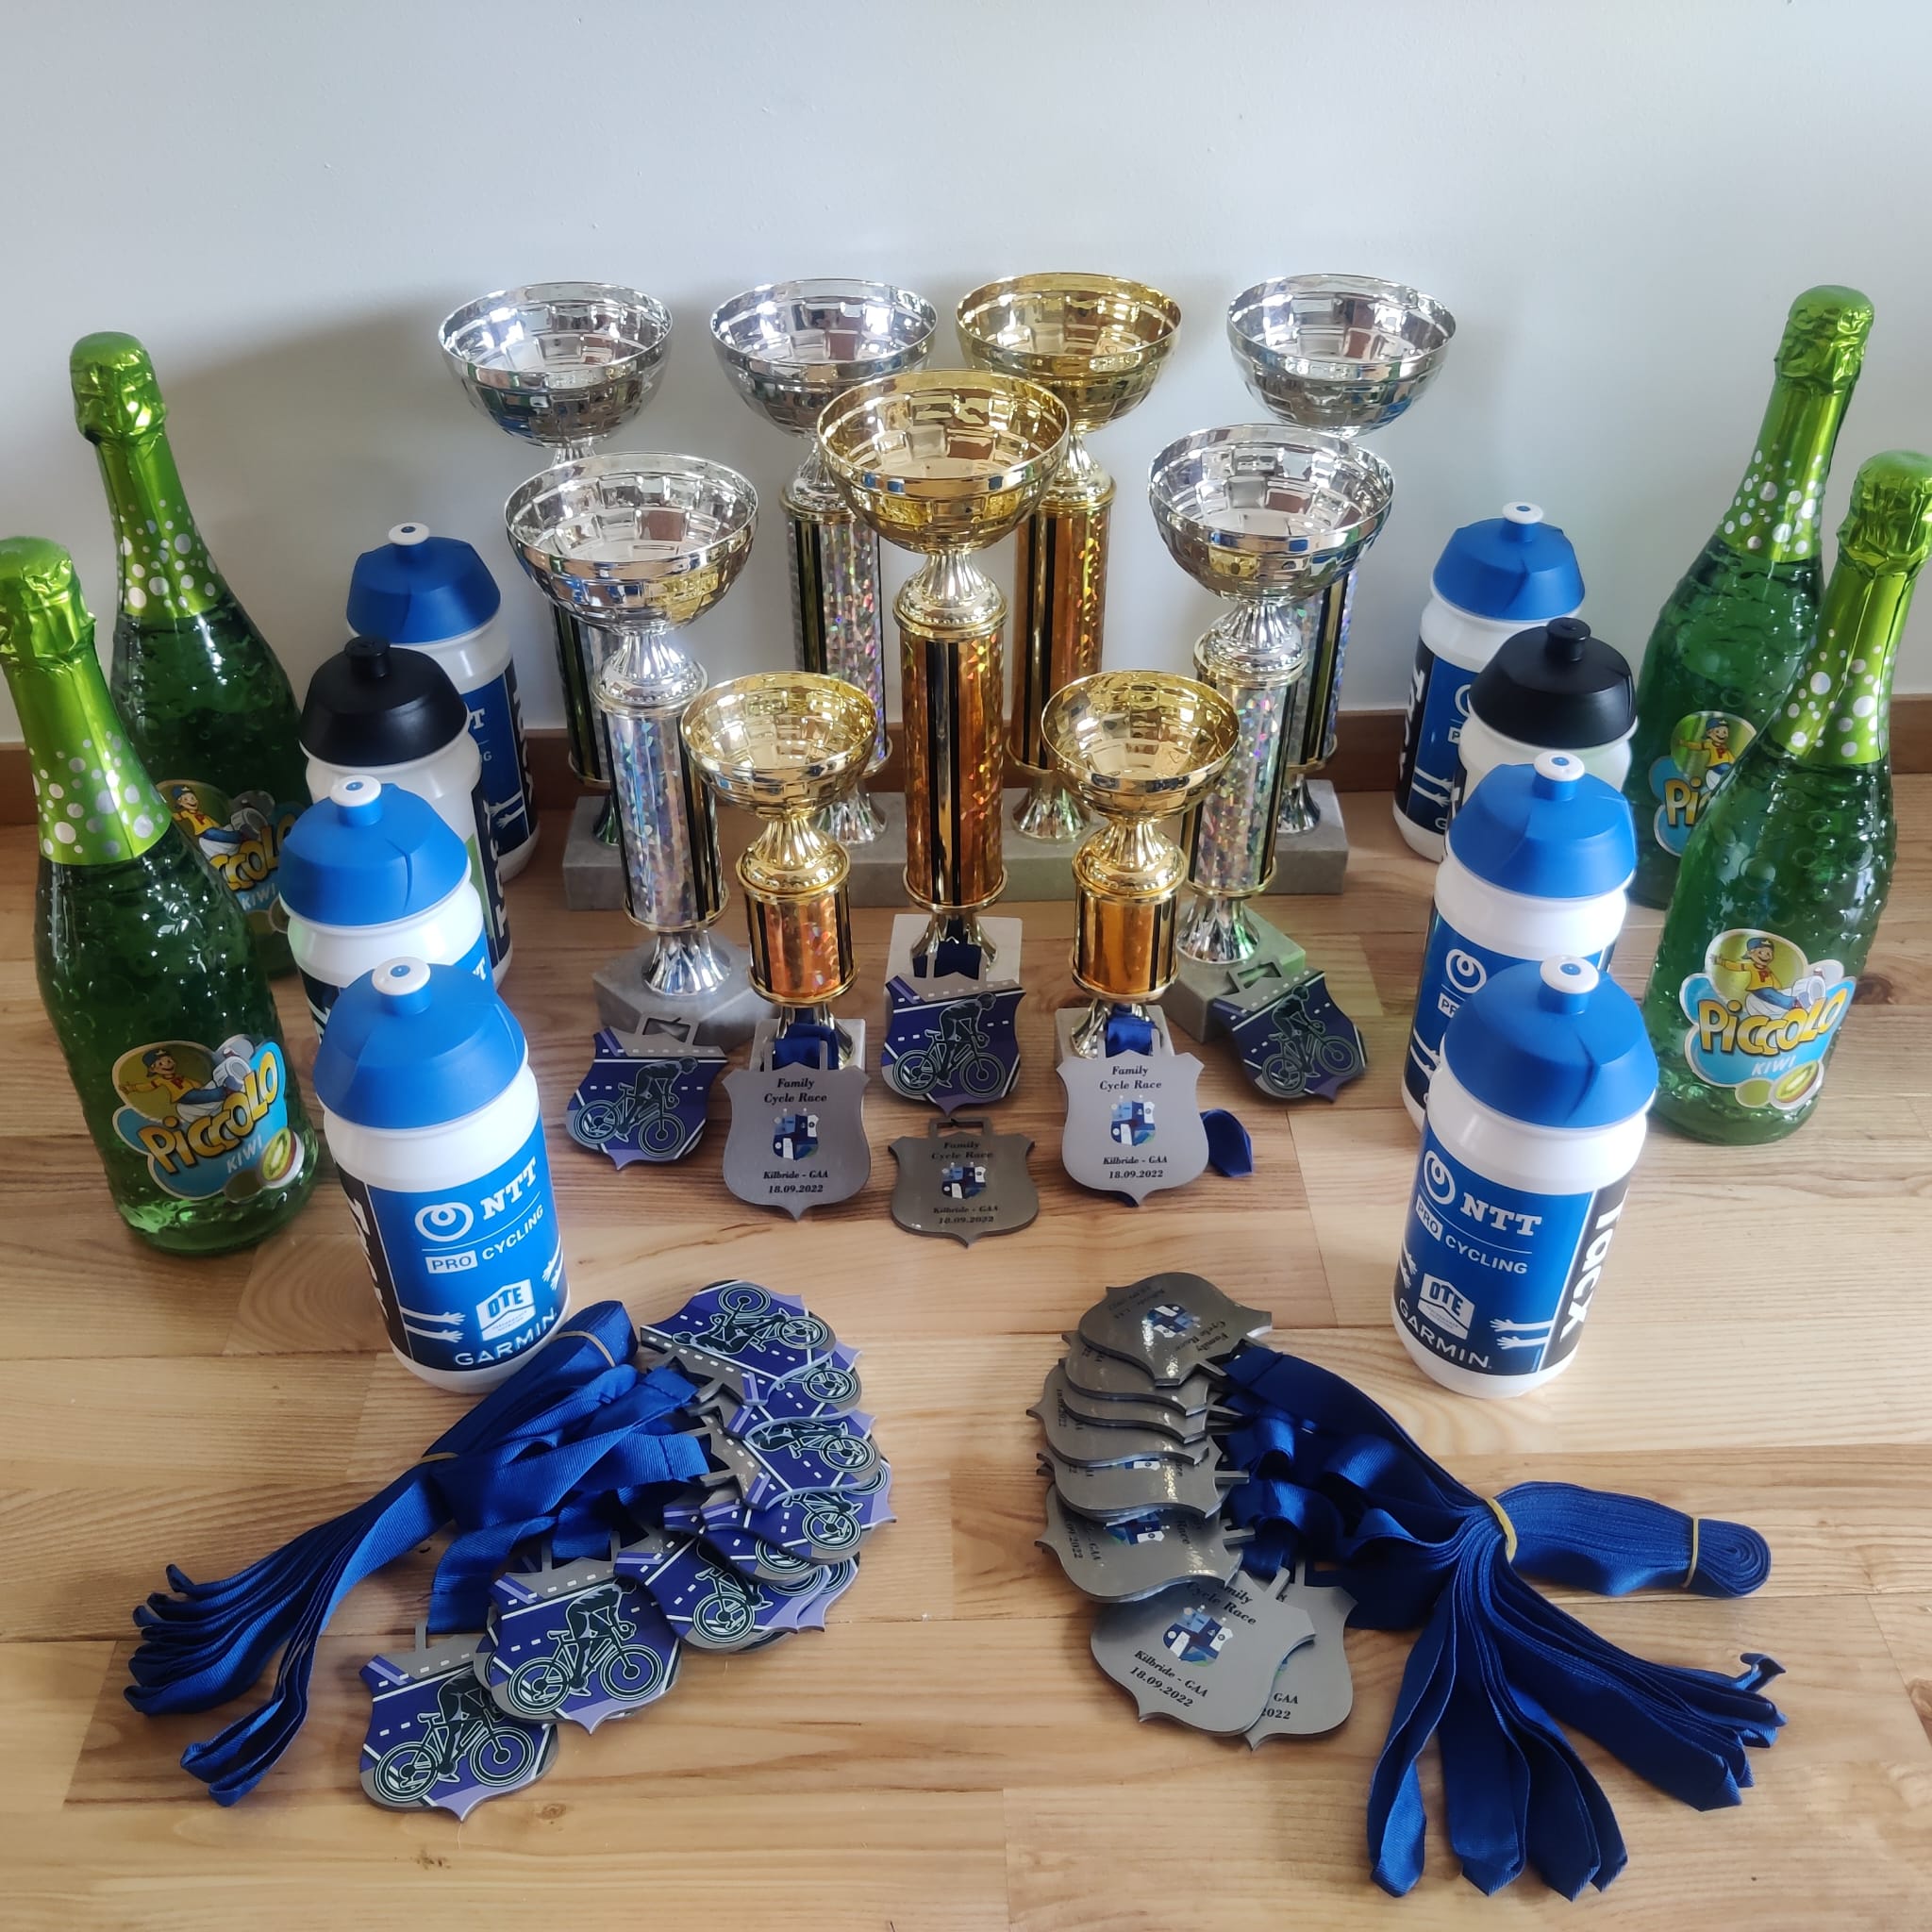 Medals and Trophies - Kilbride GAA Cycle